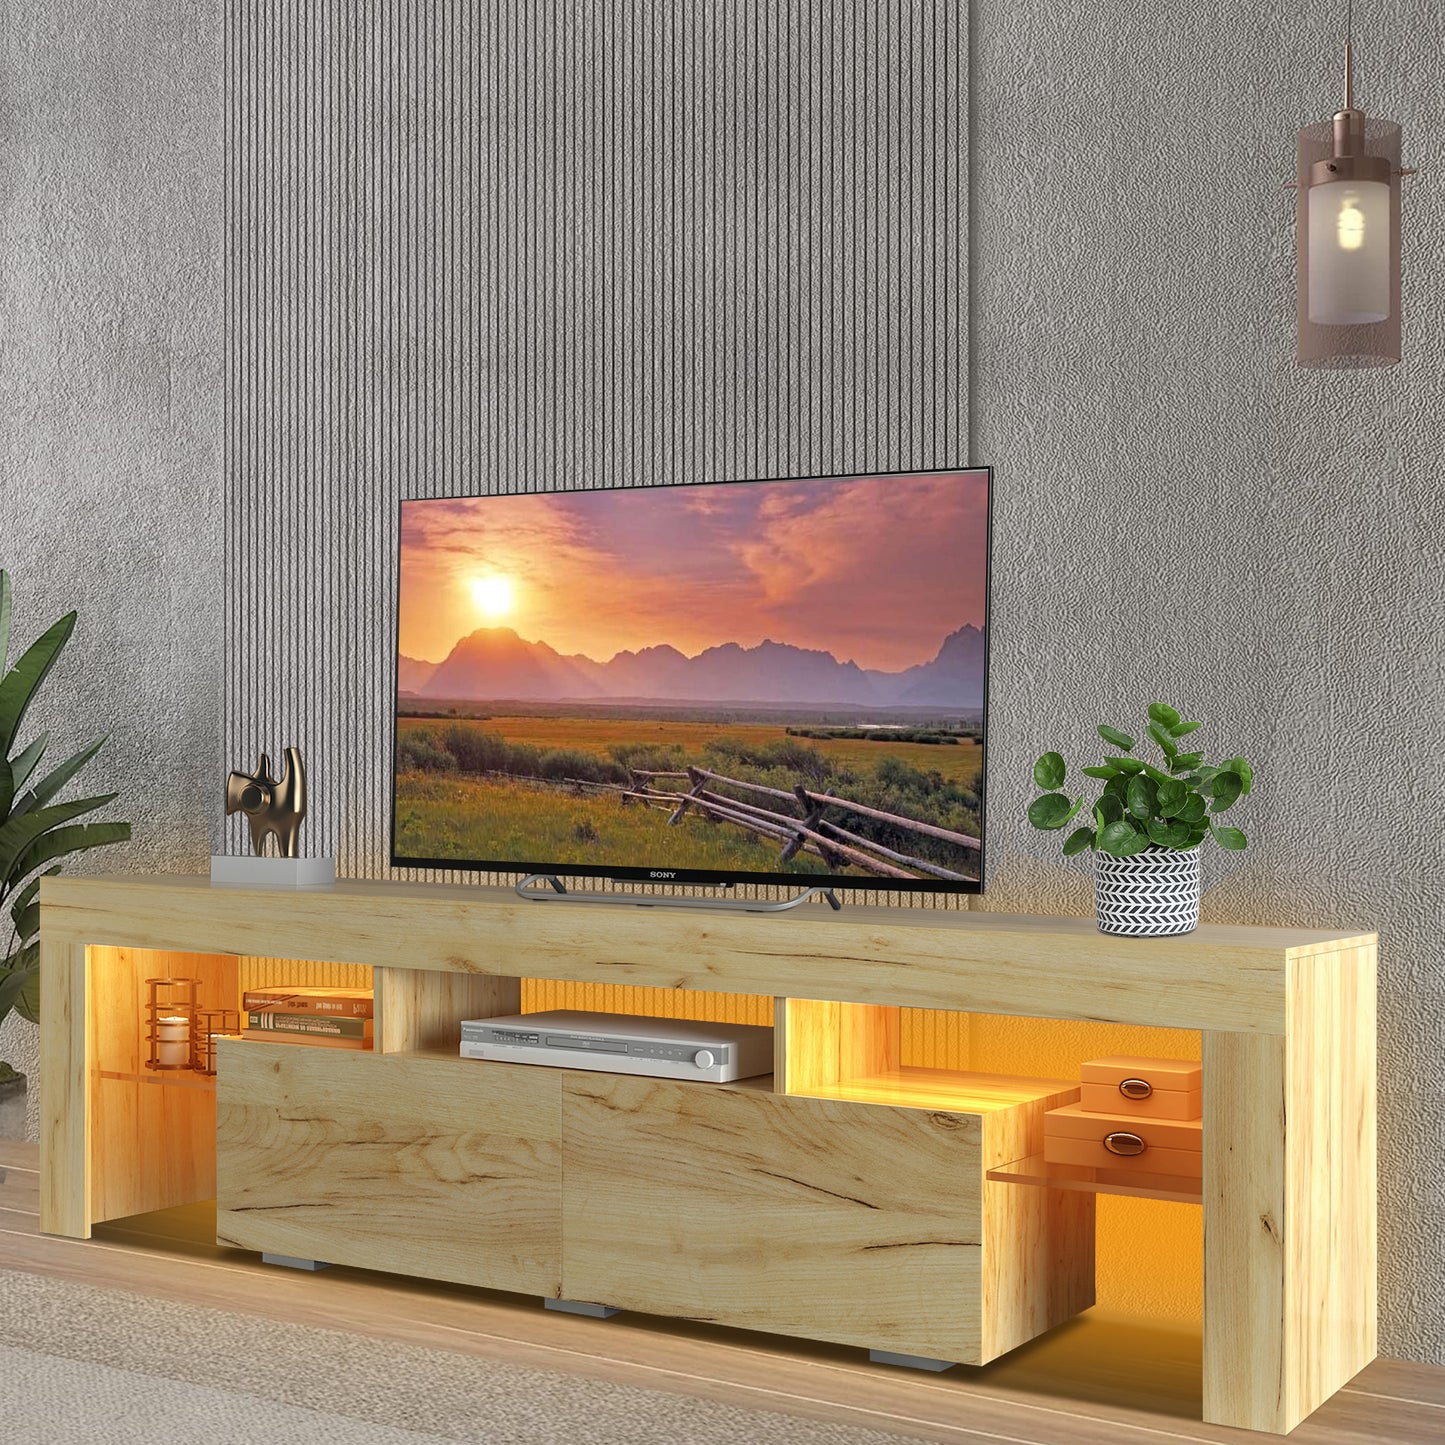 White TV Stand for 70 inch TV, Farmhouse Rustic Wooden Television Stands TV Cabinet Console Table with 16 Colors LED Lights, Living Room TV Table Stand Buffet Cabinet with Storage, 63"L×14" W×18"H